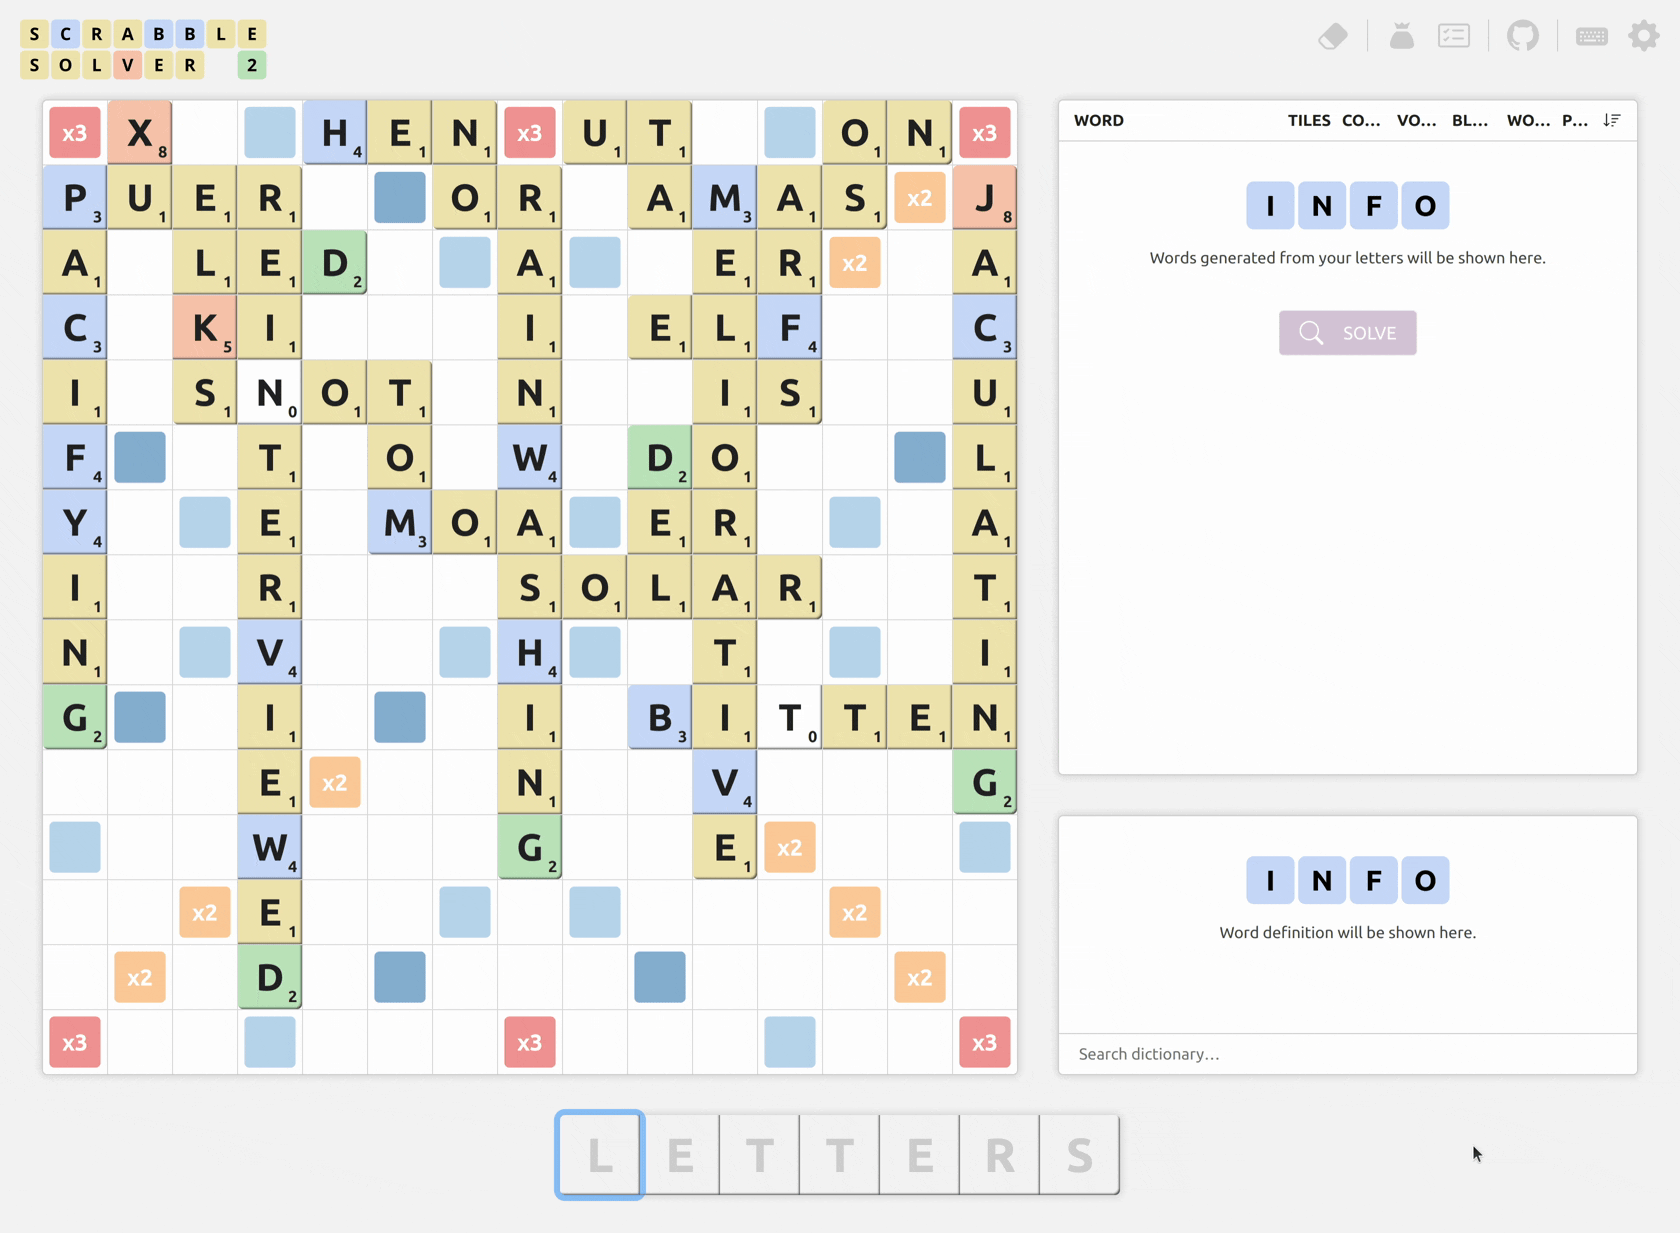 Screencast GIF showing user interface when solving for oxyphenbutazone, which is a top-scoring word in English version of Scrabble